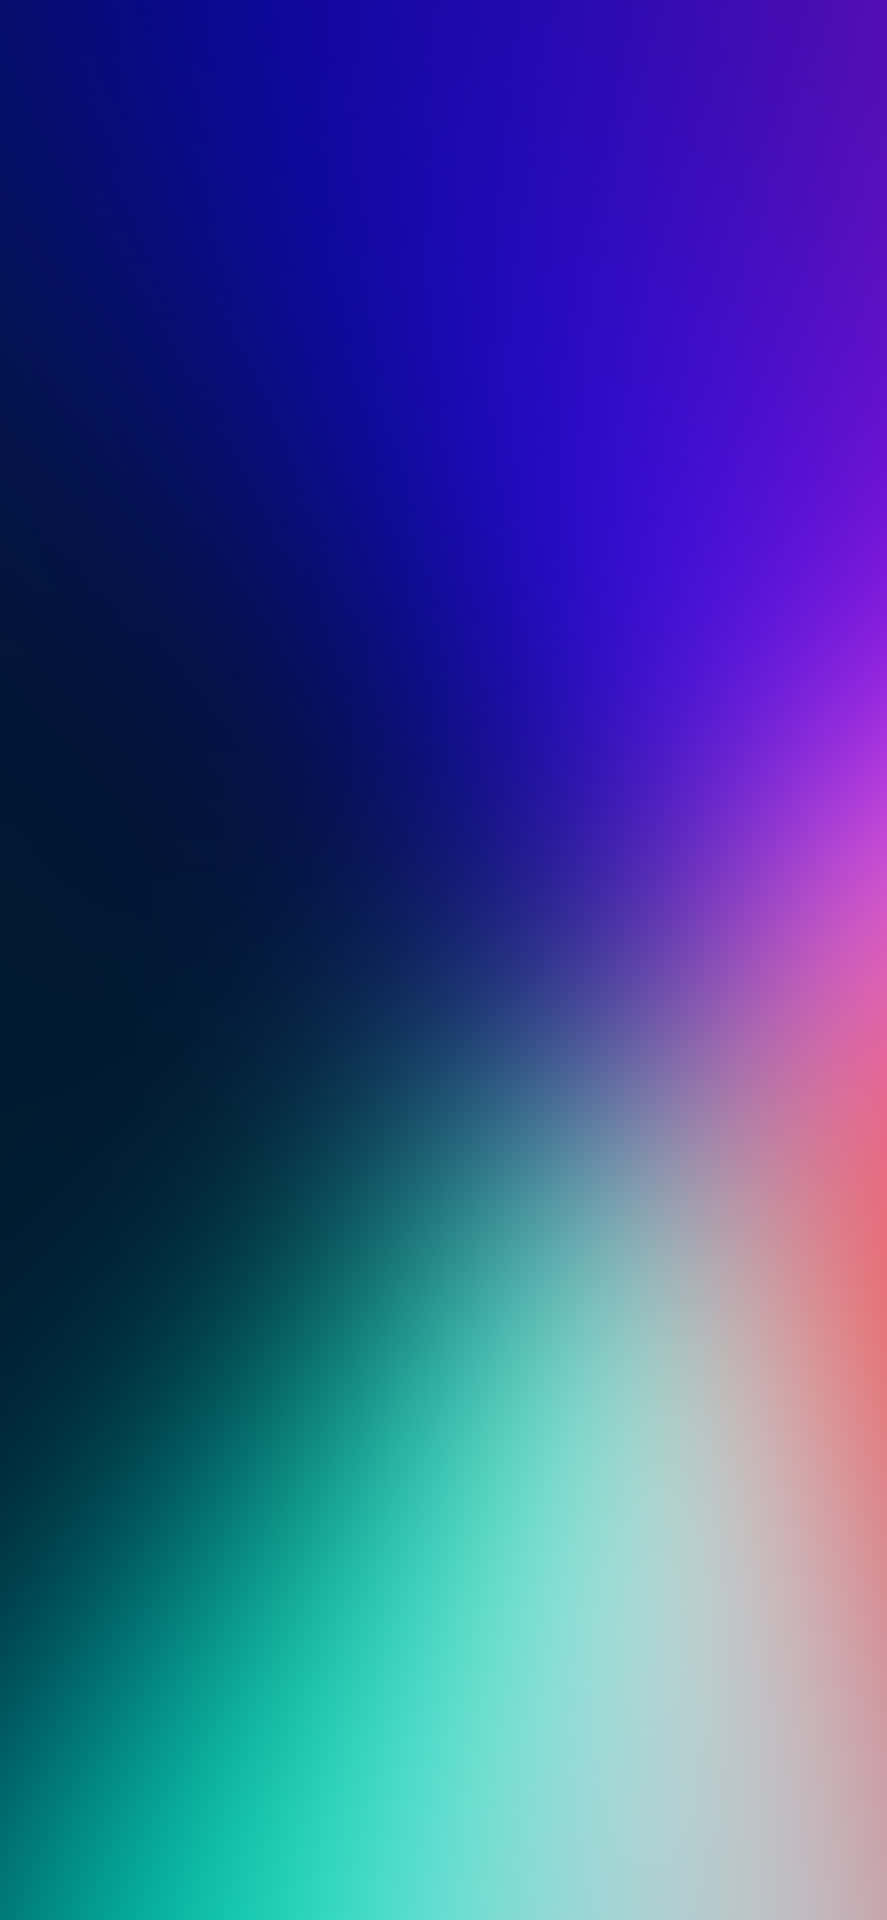 A Blurred Background With A Colorful Background Wallpaper